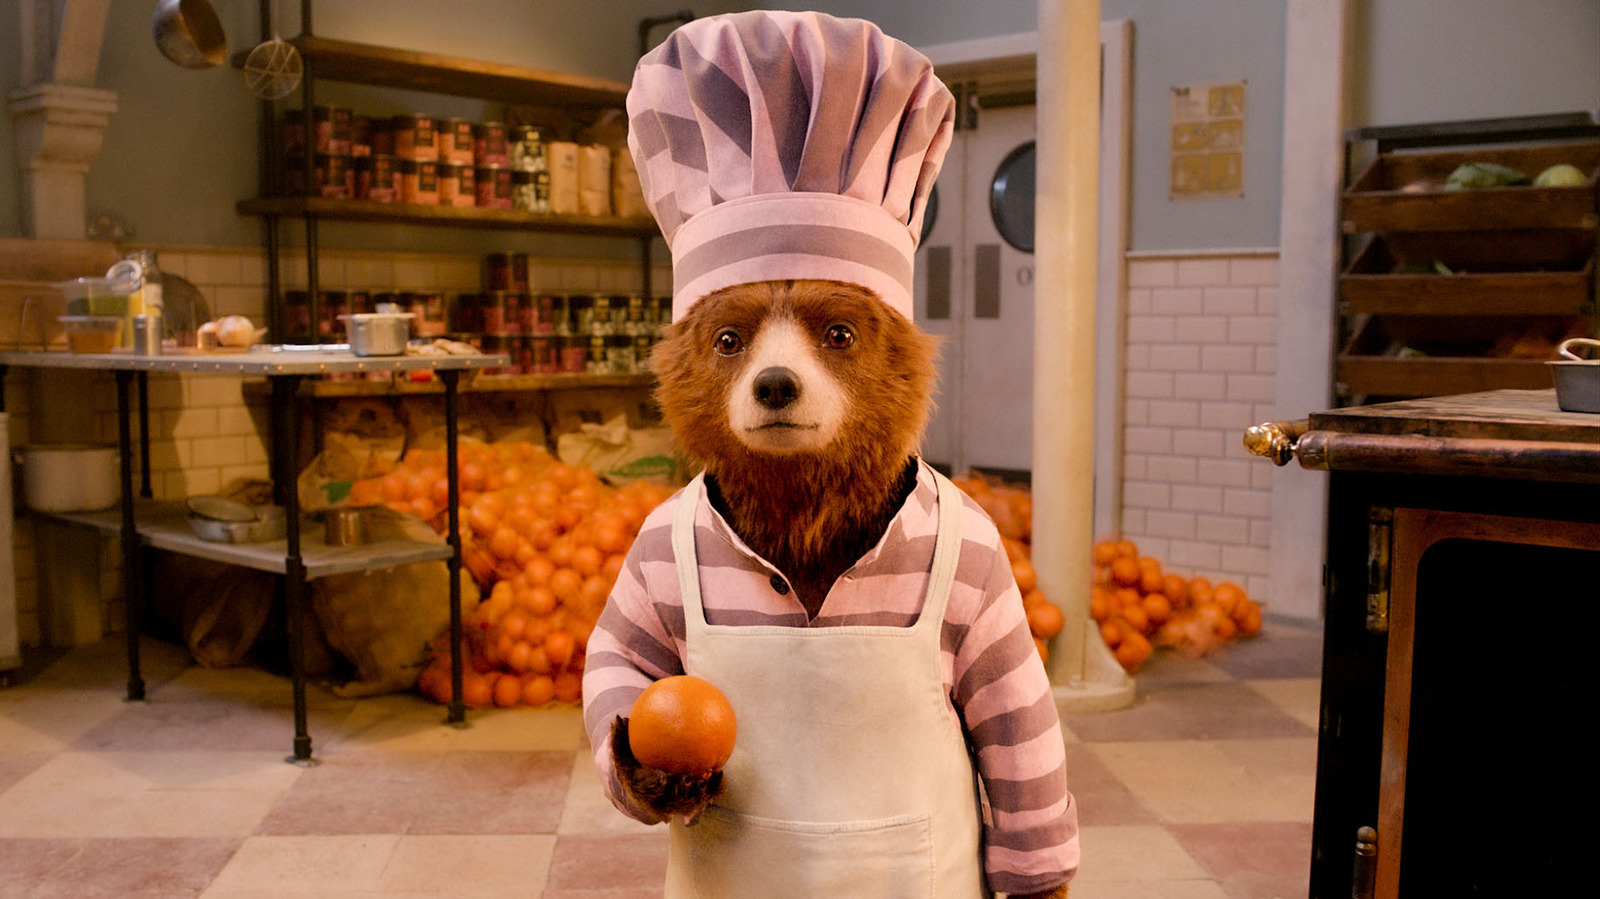 #The Paddington Movies Are A (Very Polite) Takedown Of British Colonialism And Xenophobia